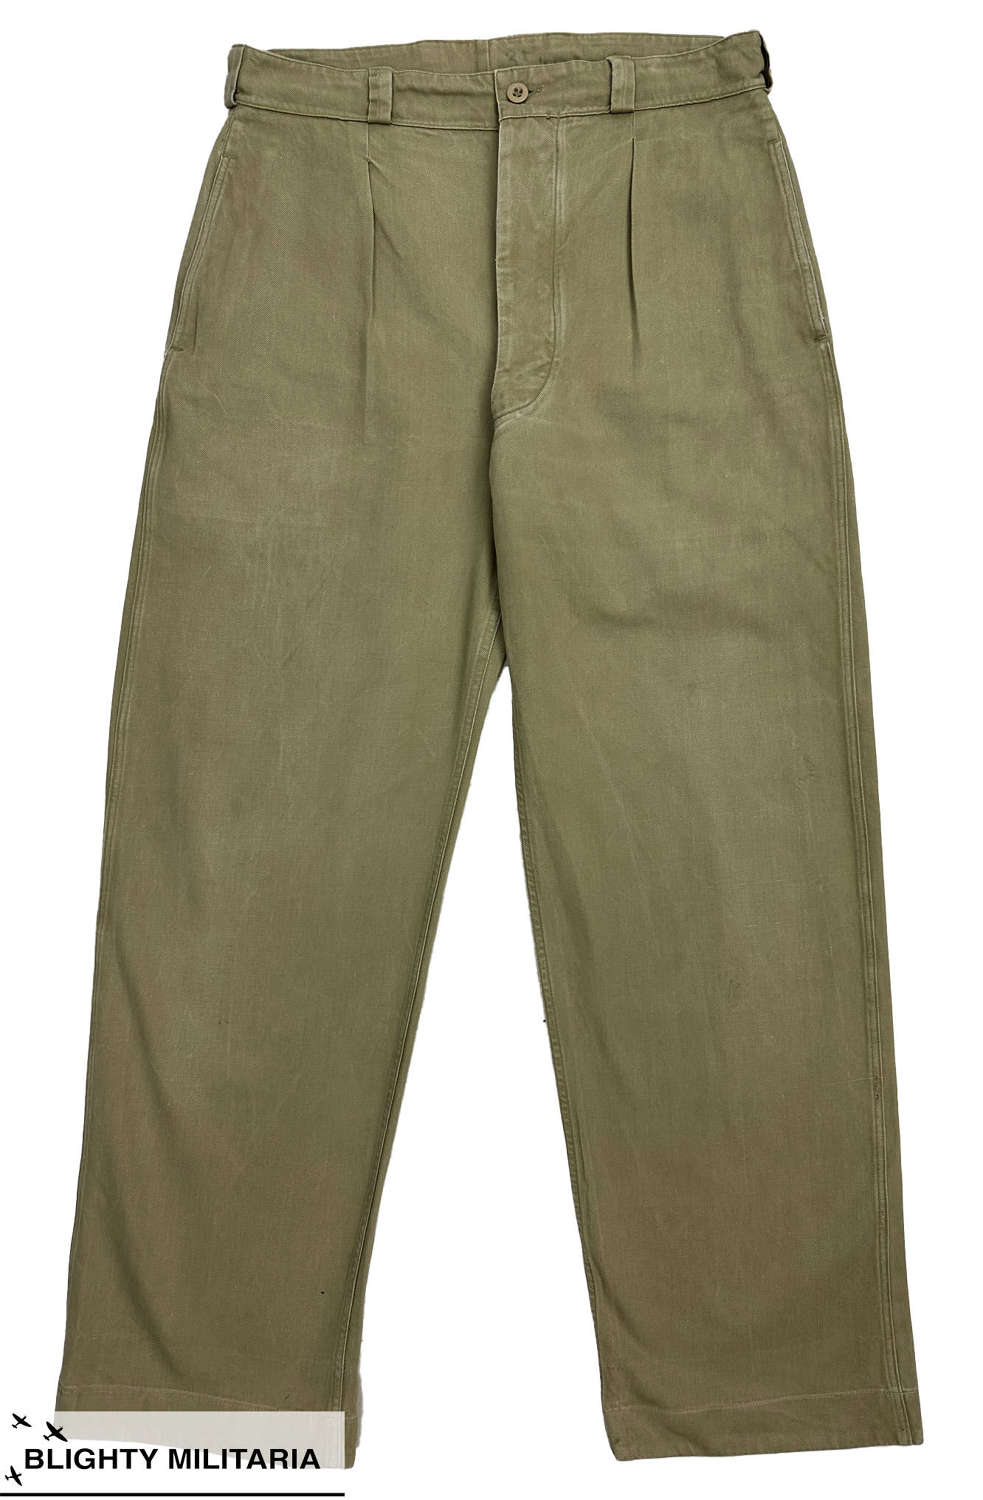 Original 1950s French Army M52 Chino Trousers - Size 34x32